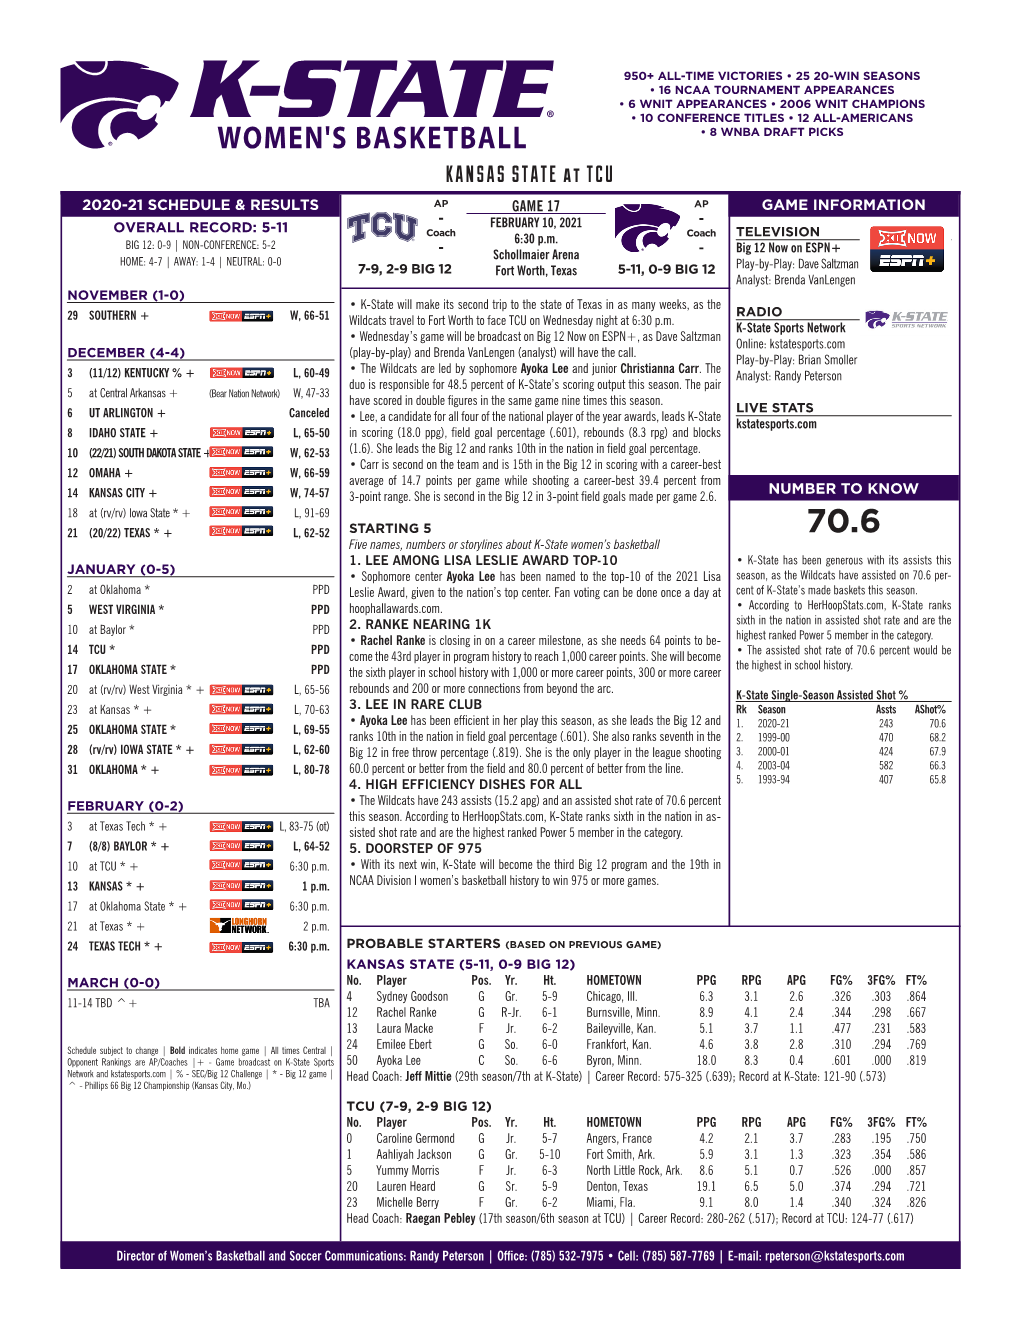 KANSAS STATE at TCU 2020-21 SCHEDULE & RESULTS AP GAME 17 AP GAME INFORMATION - - OVERALL RECORD: 5-11 FEBRUARY 10, 2021 Coach 6:30 P.M